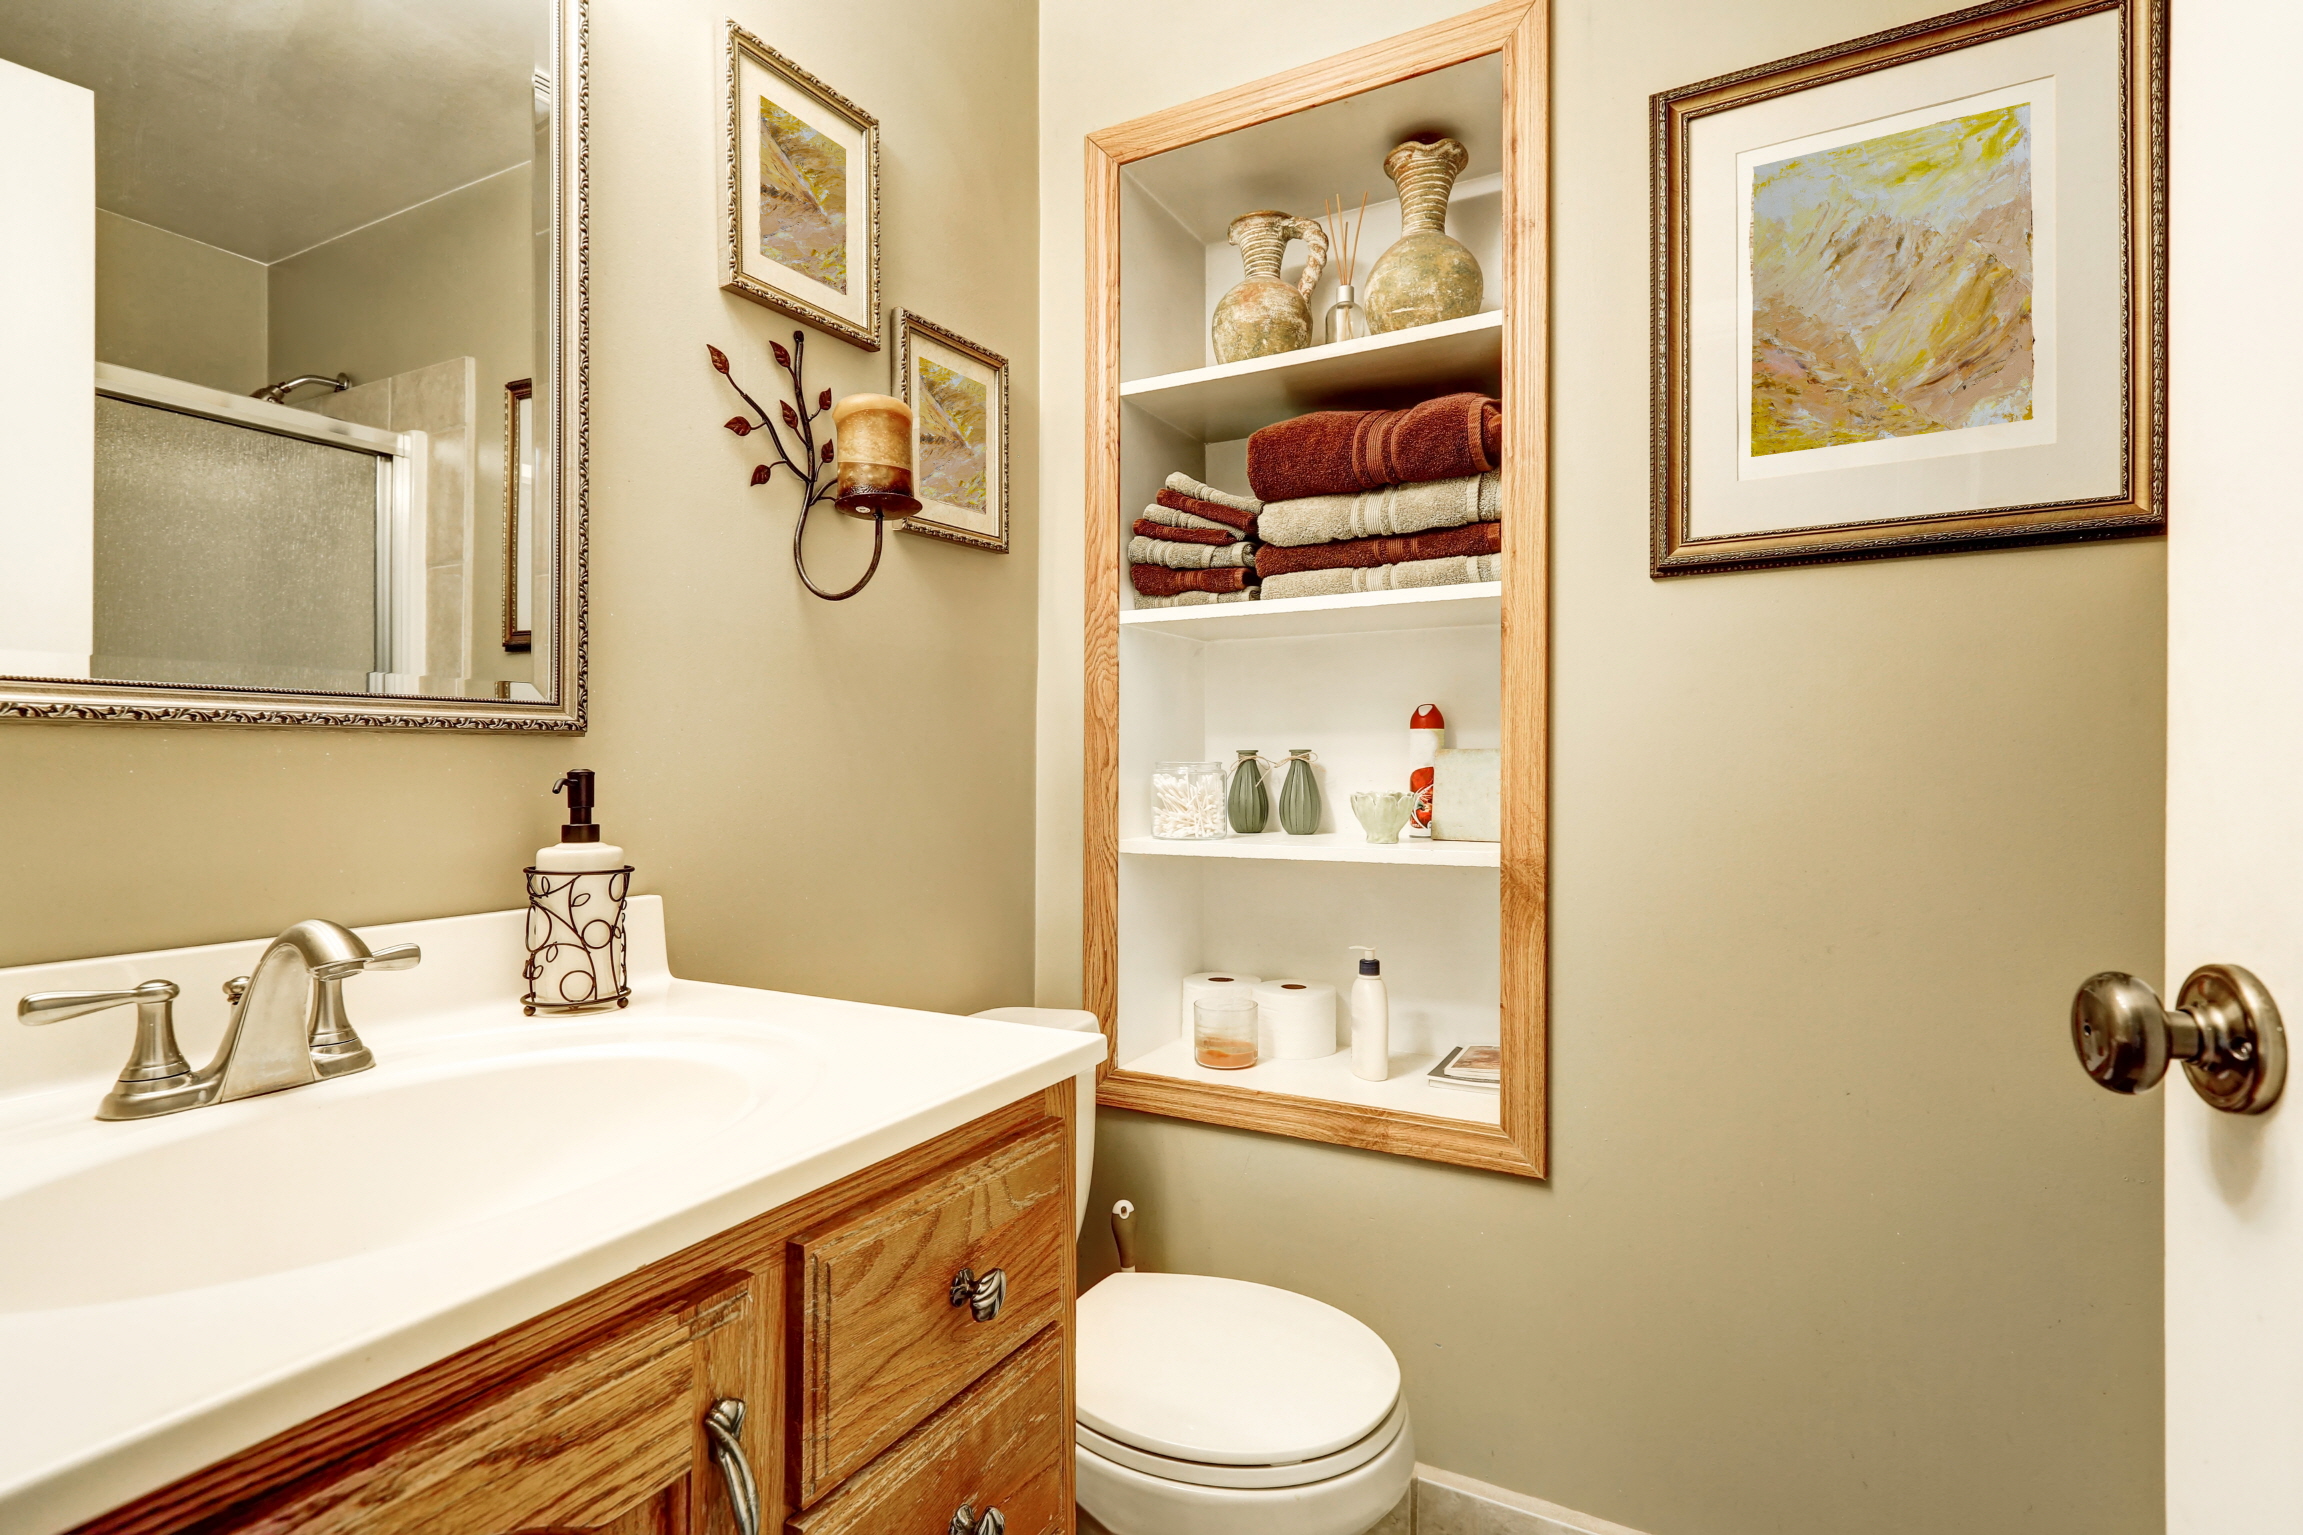 Ensure guest convenience with ample storage options in the guest bathroom, like drawers, cabinets, or shelves, for easy access to essentials.